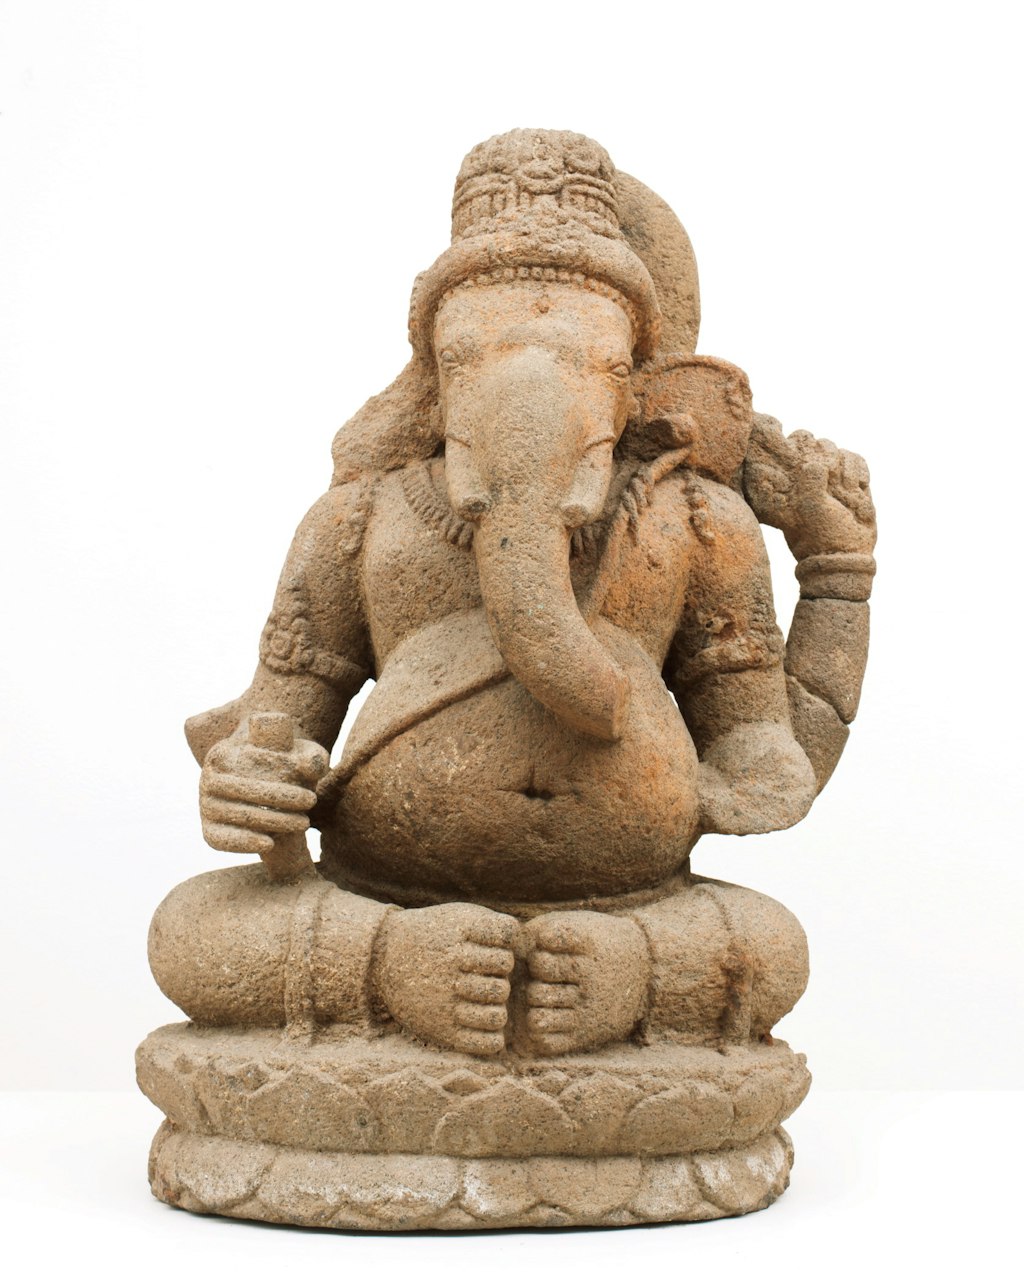 [w[Ganesha, remover of obstacles]] 10th century, Art Gallery of New South Wales